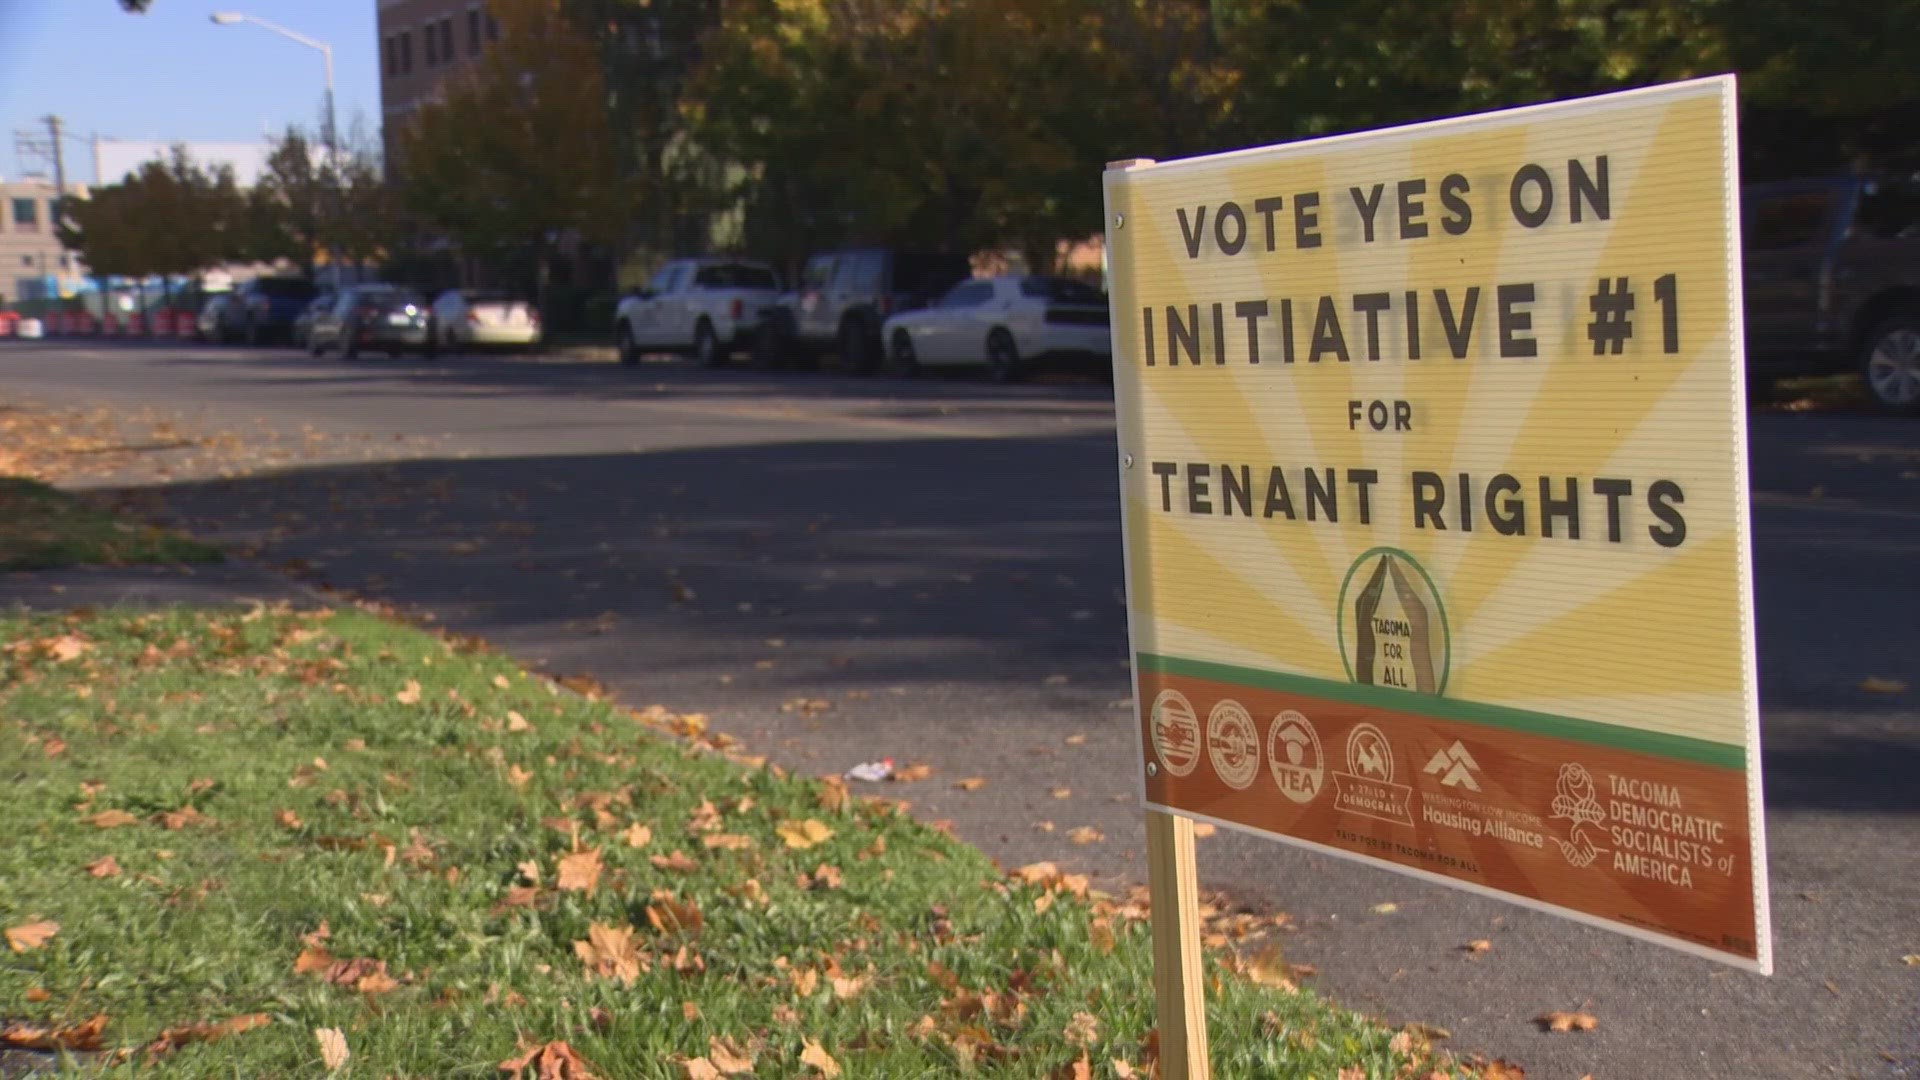 As the general election approaches, “Tacoma for All” received disturbing news about their campaign signs, which support Initiative 1 and stronger tenant protections.